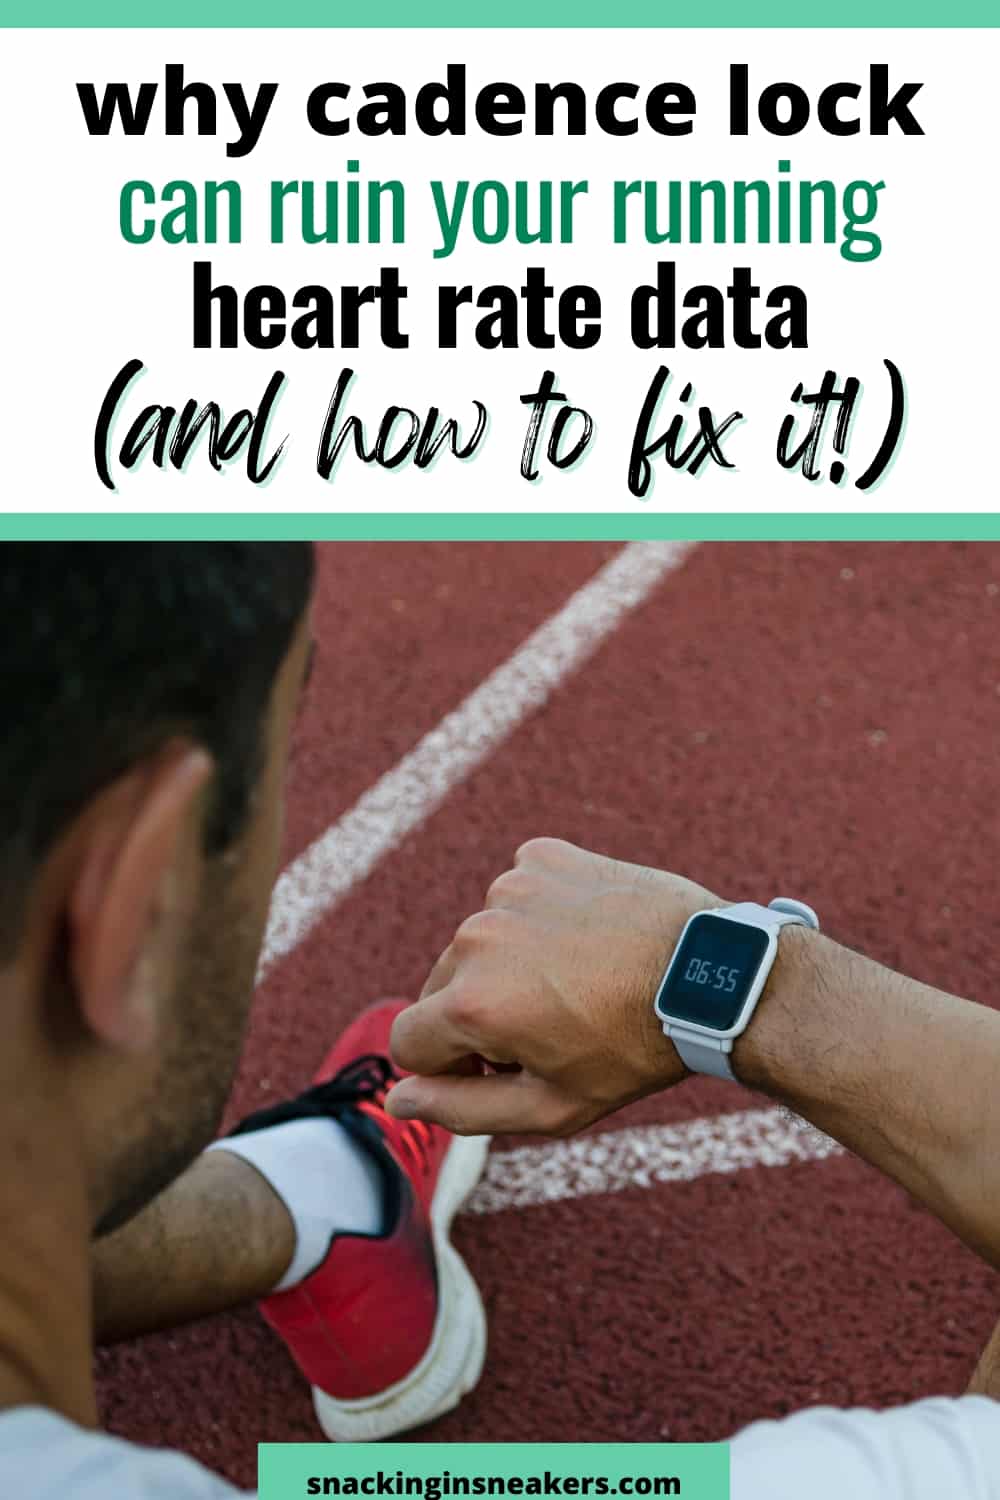 A runner sitting on the track looking at his watch to see heart rate data with a text overlay that says why cadence lock can ruin your running heart rate data.